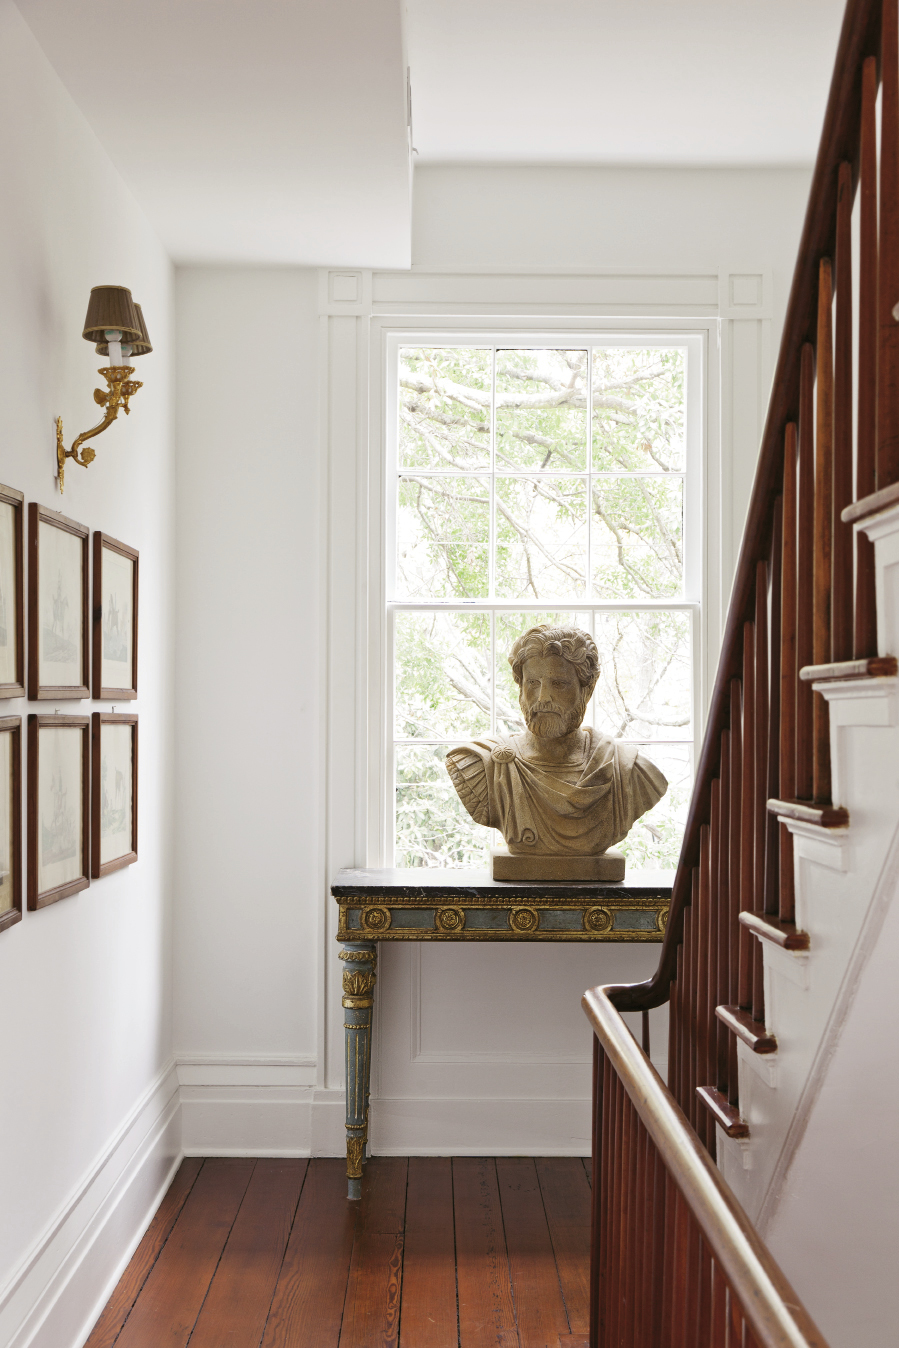 HEIRLOOM IMPORTS A bust of a Roman commander sits on a gilded 18th-century table in the second-floor hallway.